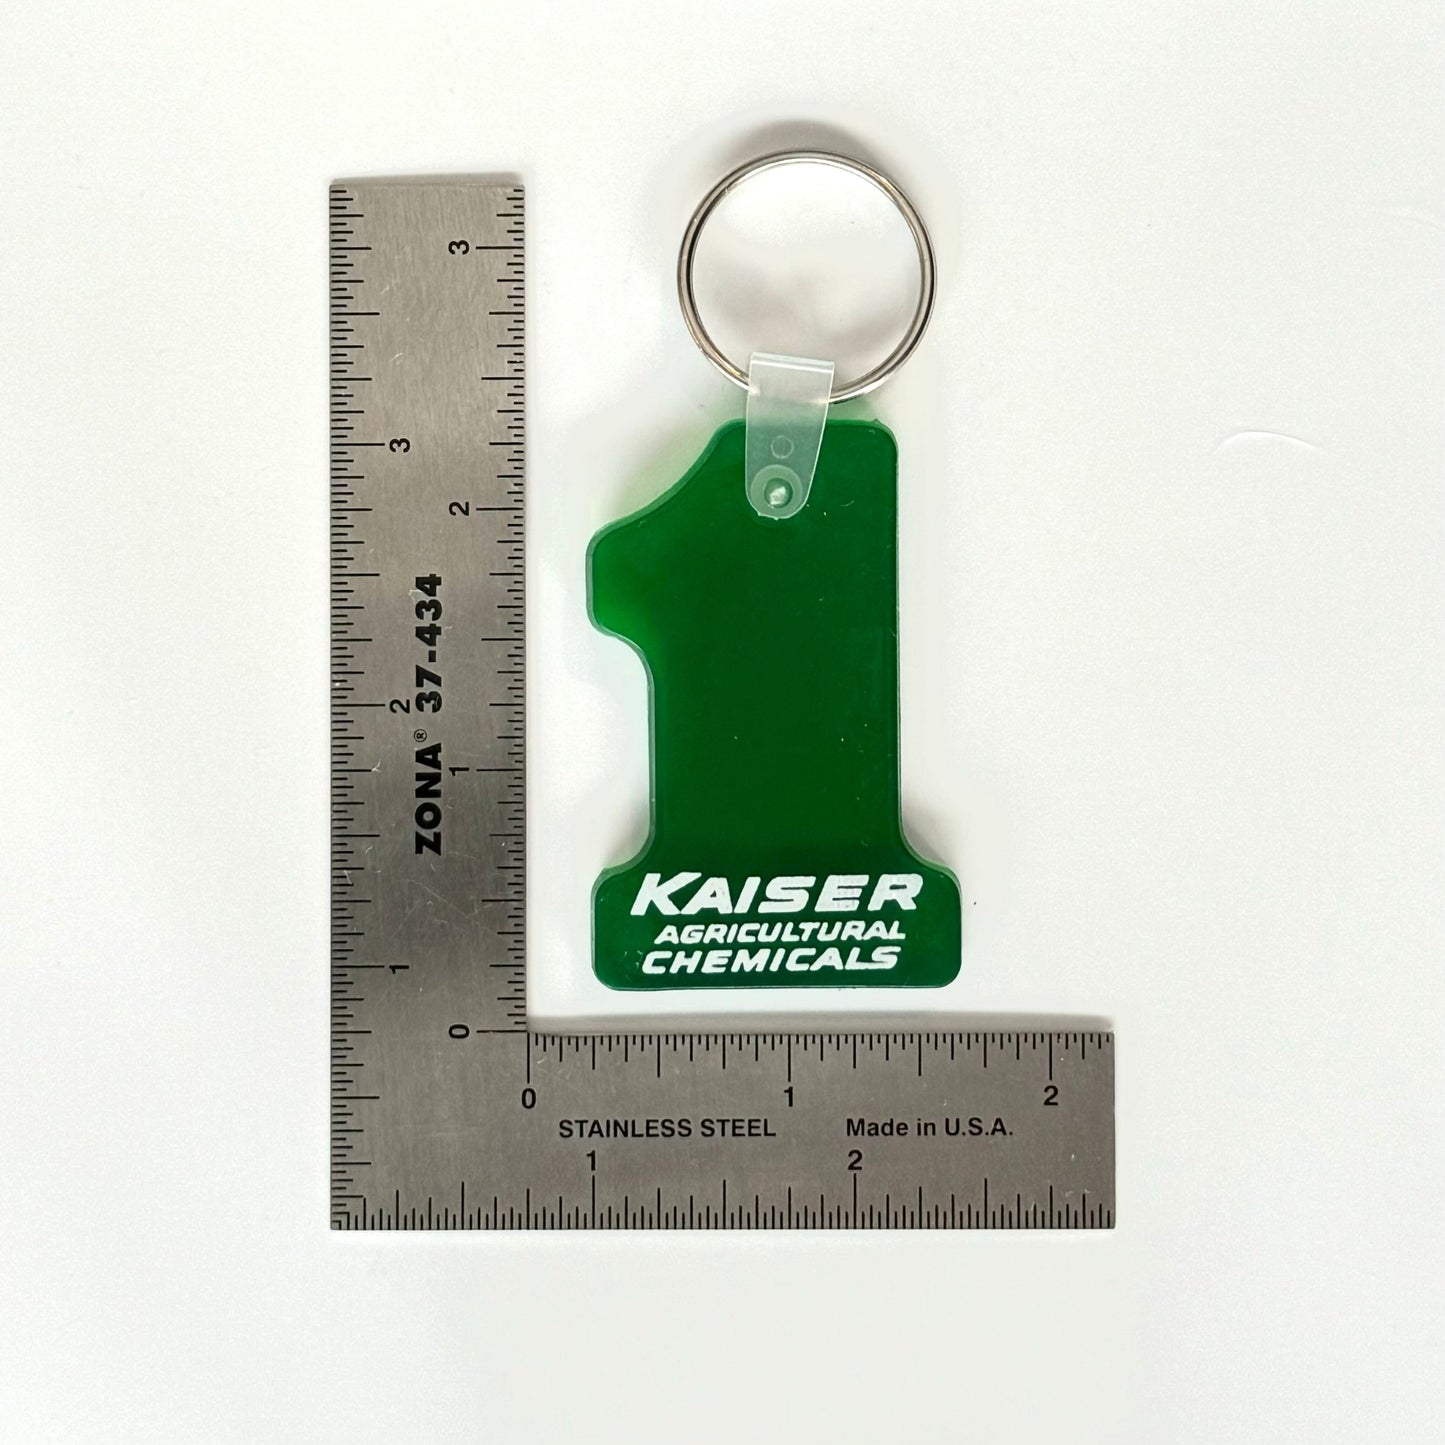 KAISER AGRICULTURAL CHEMICALS Keychain Key Ring Green #1 Rubber